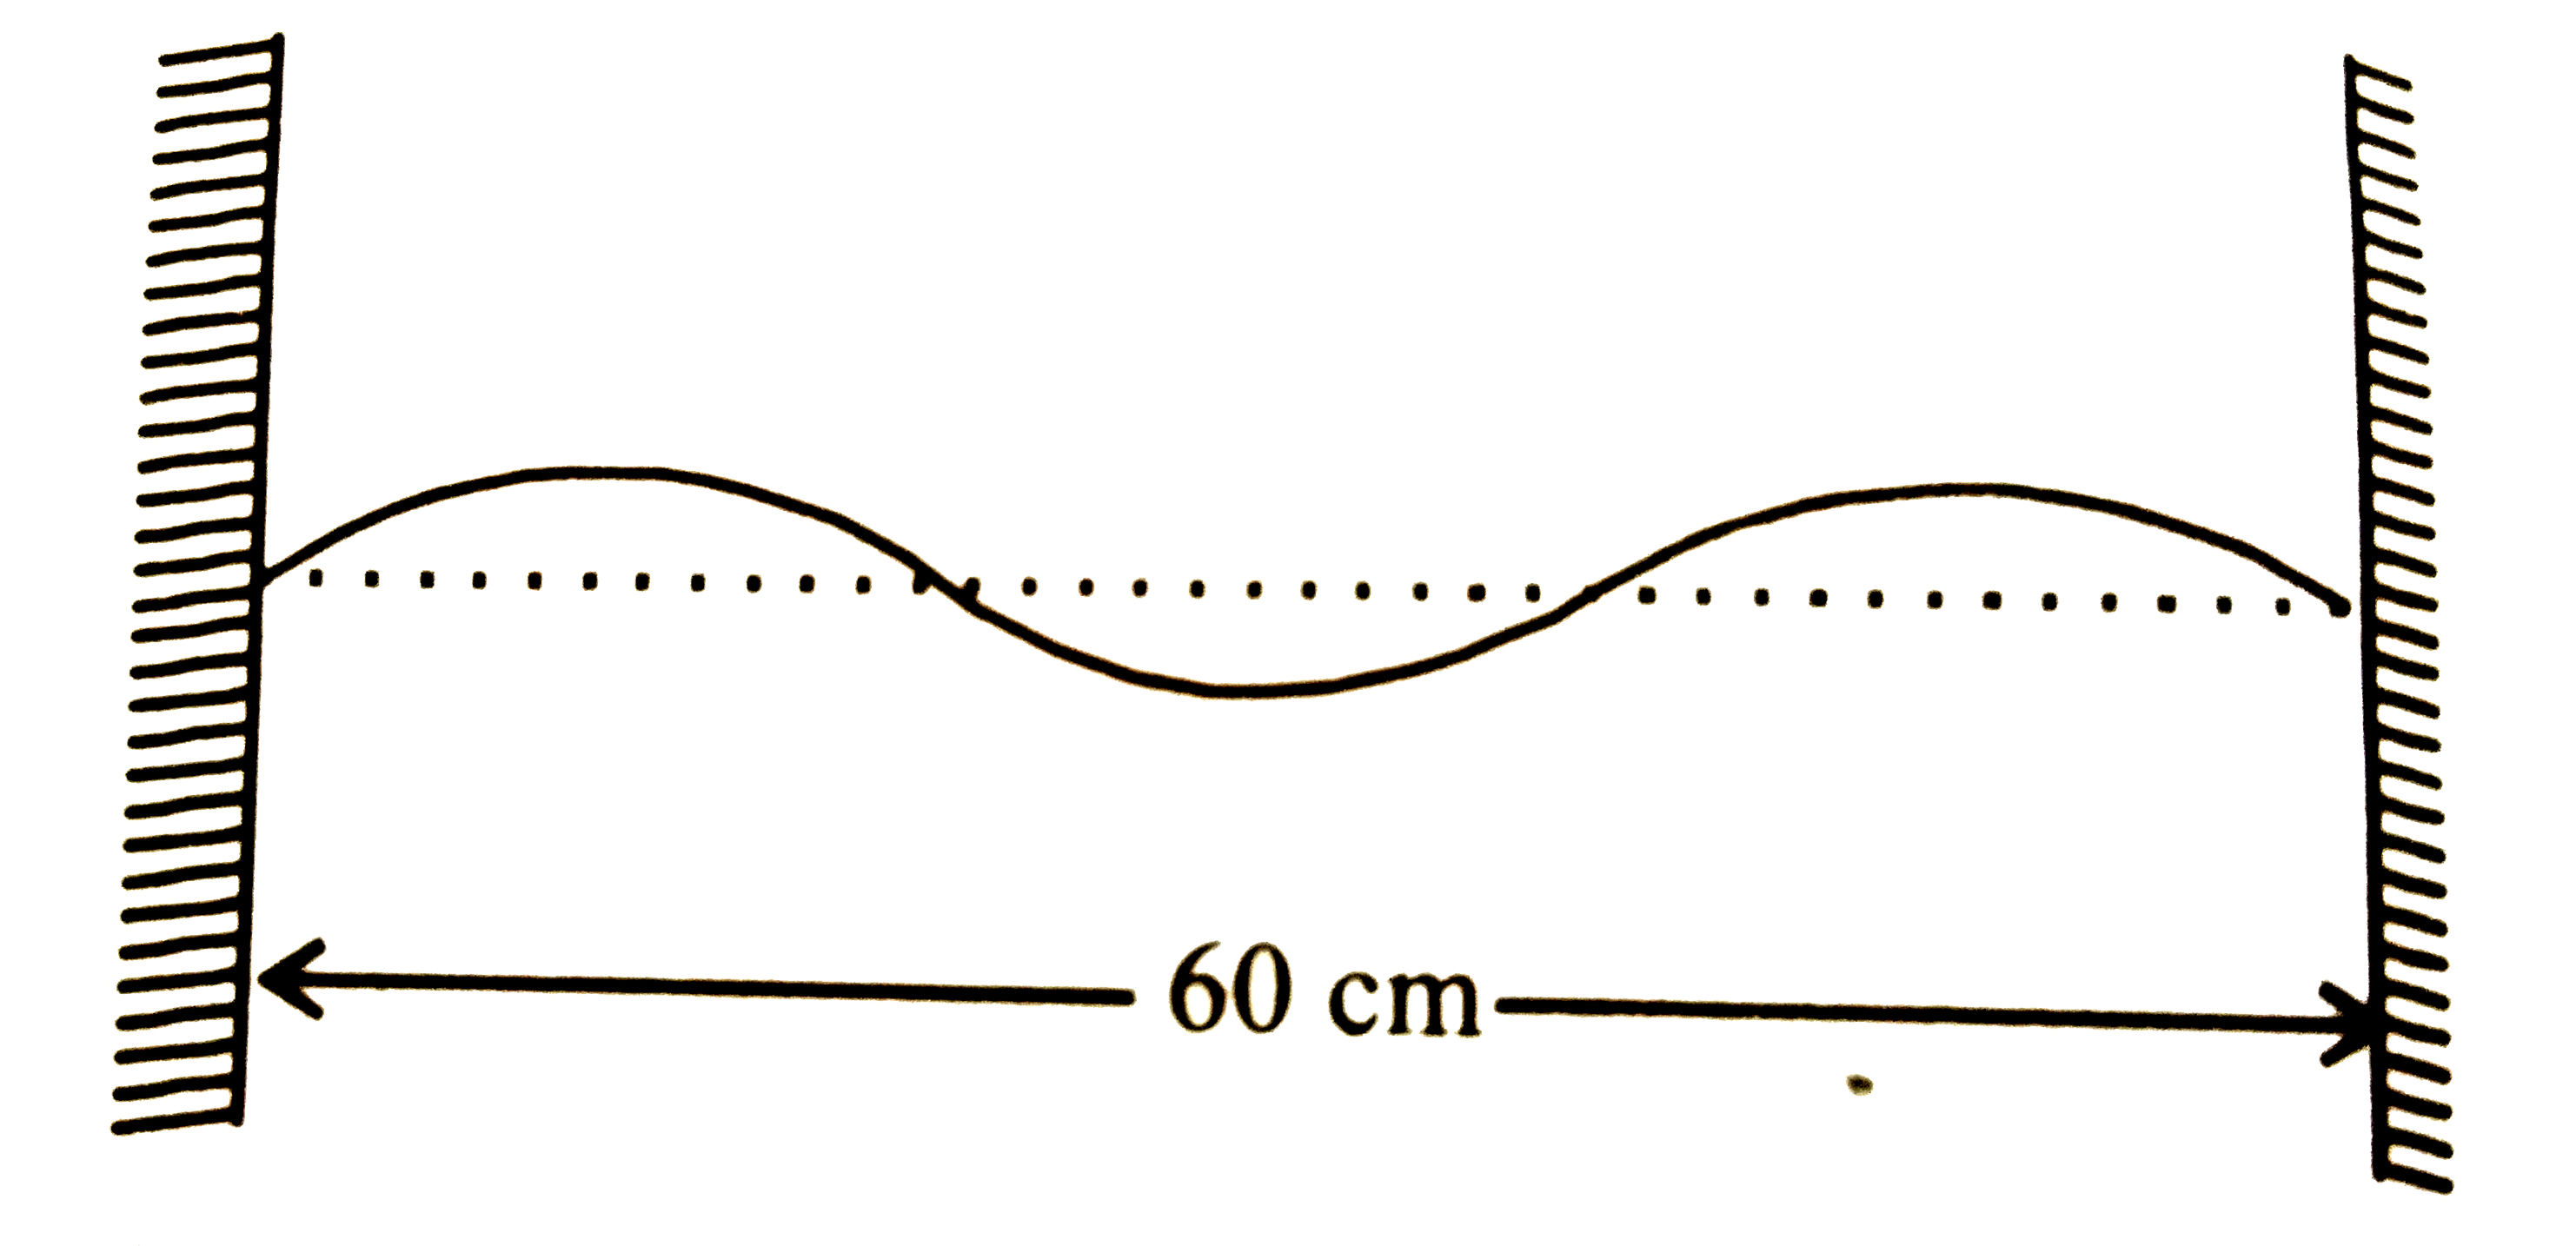 The standing wave pattern along a string of length 60 cm is shown in the above diagram. If the speed of the transverse waves on this string is 300 m/s, in which one of the following modes is the string vibrating?